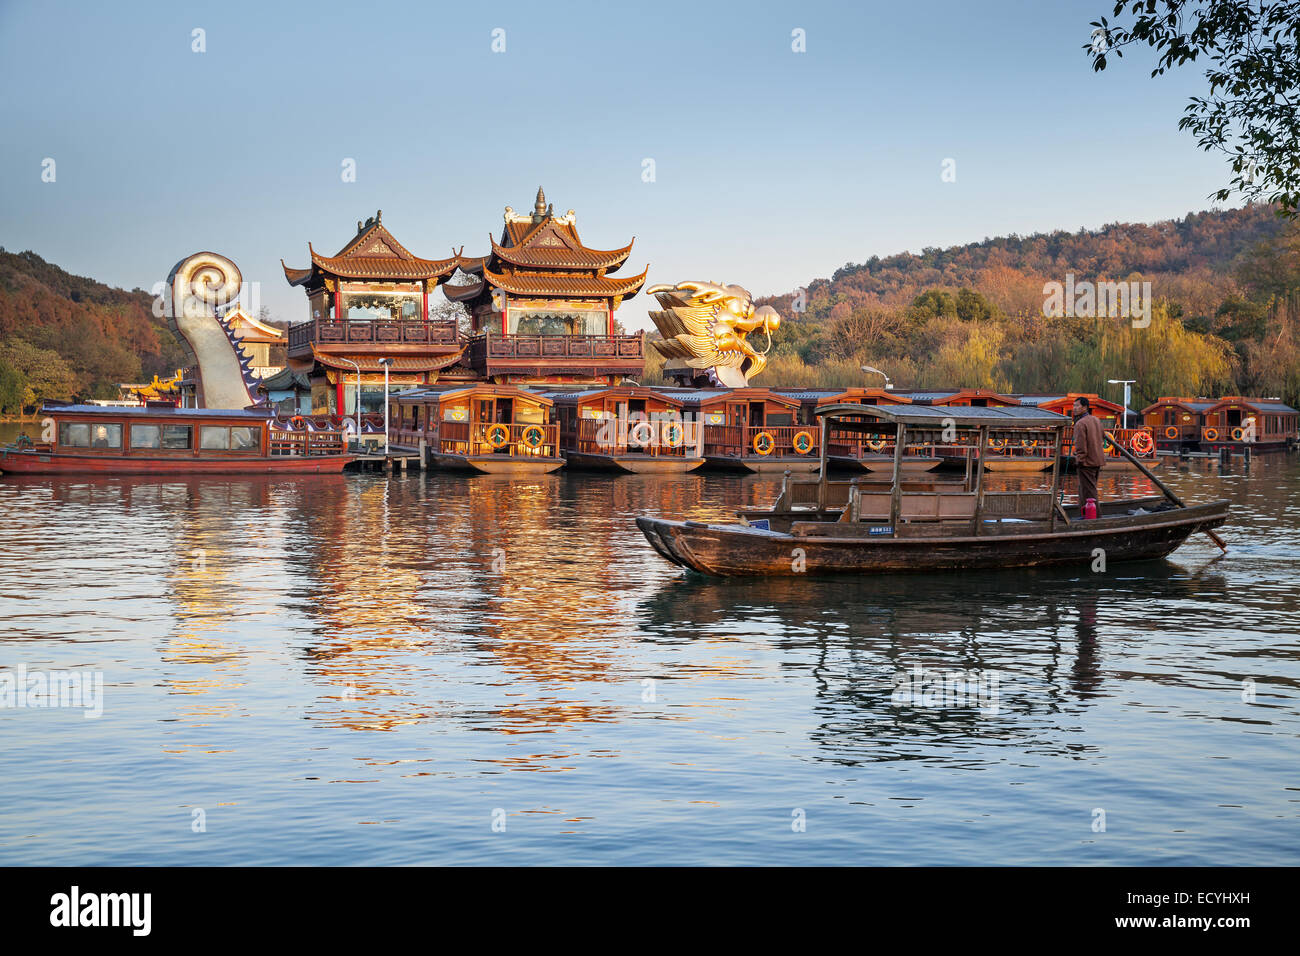 Hangzhou, China - December 5, 2014: Traditional Chinese wooden recreation boat with tourists and boatman floats on the West Lake Stock Photo